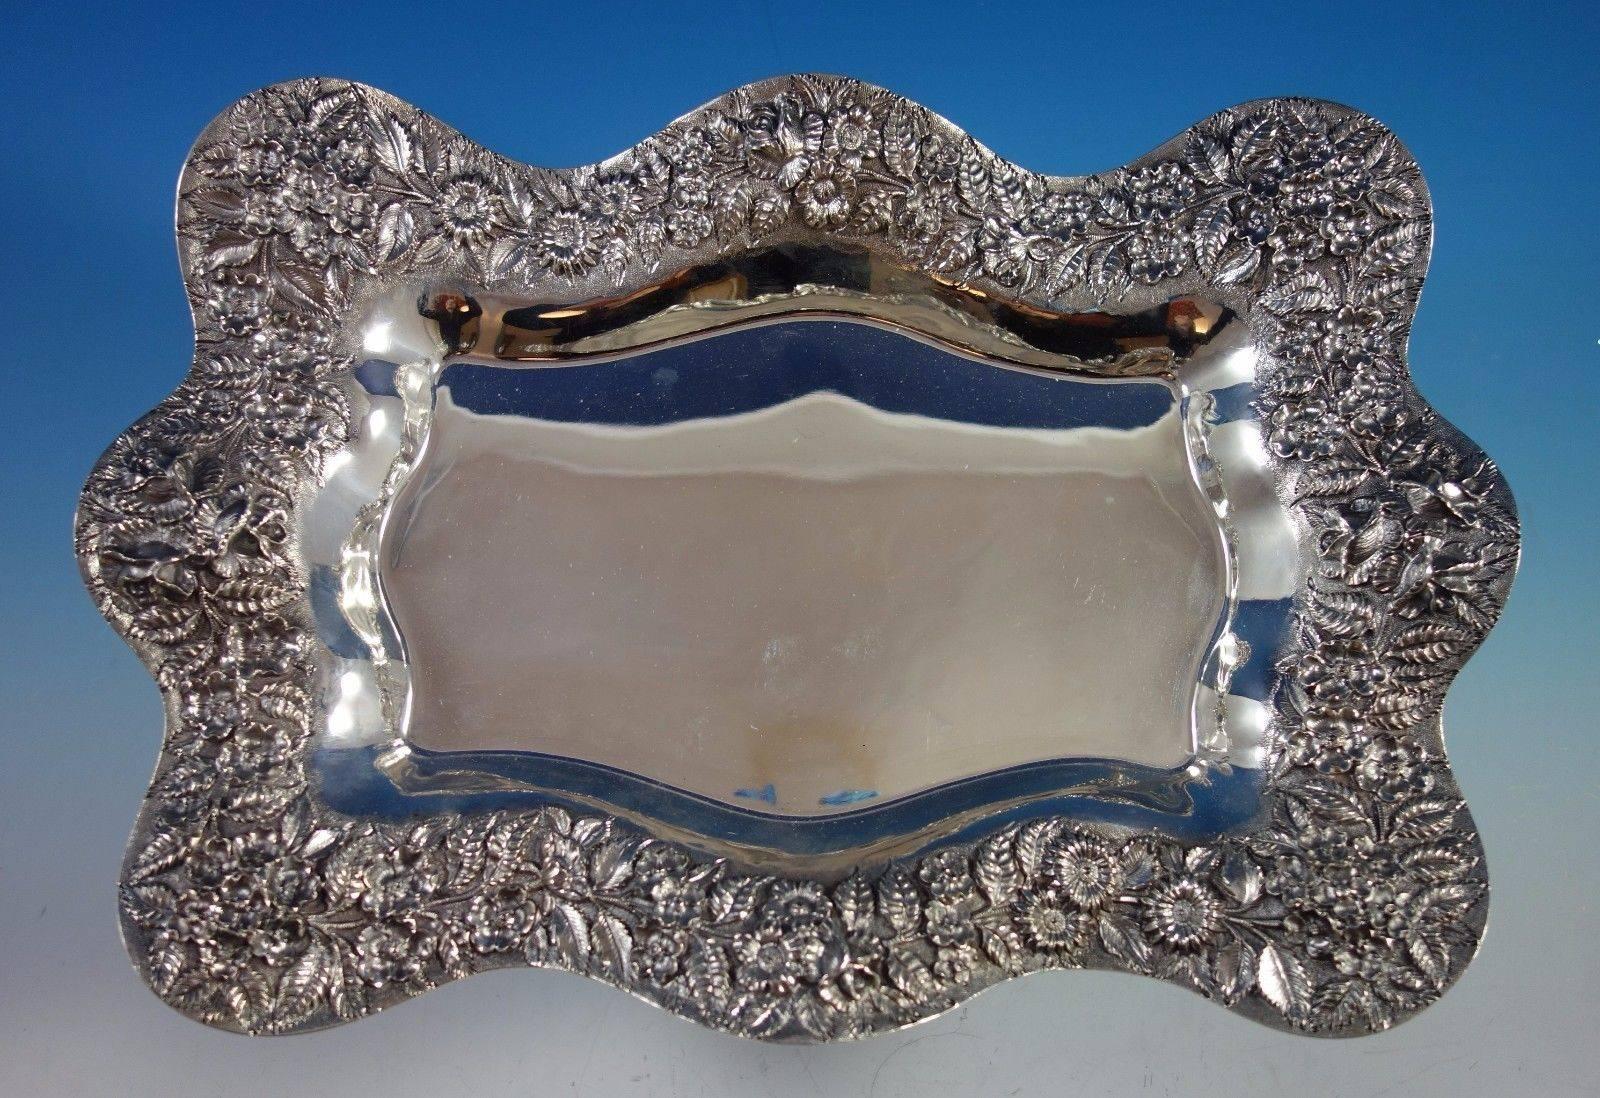 Baltimore Rose by Schofield Sterling Silver Platter with Wavy Edge, Marked #1480 1